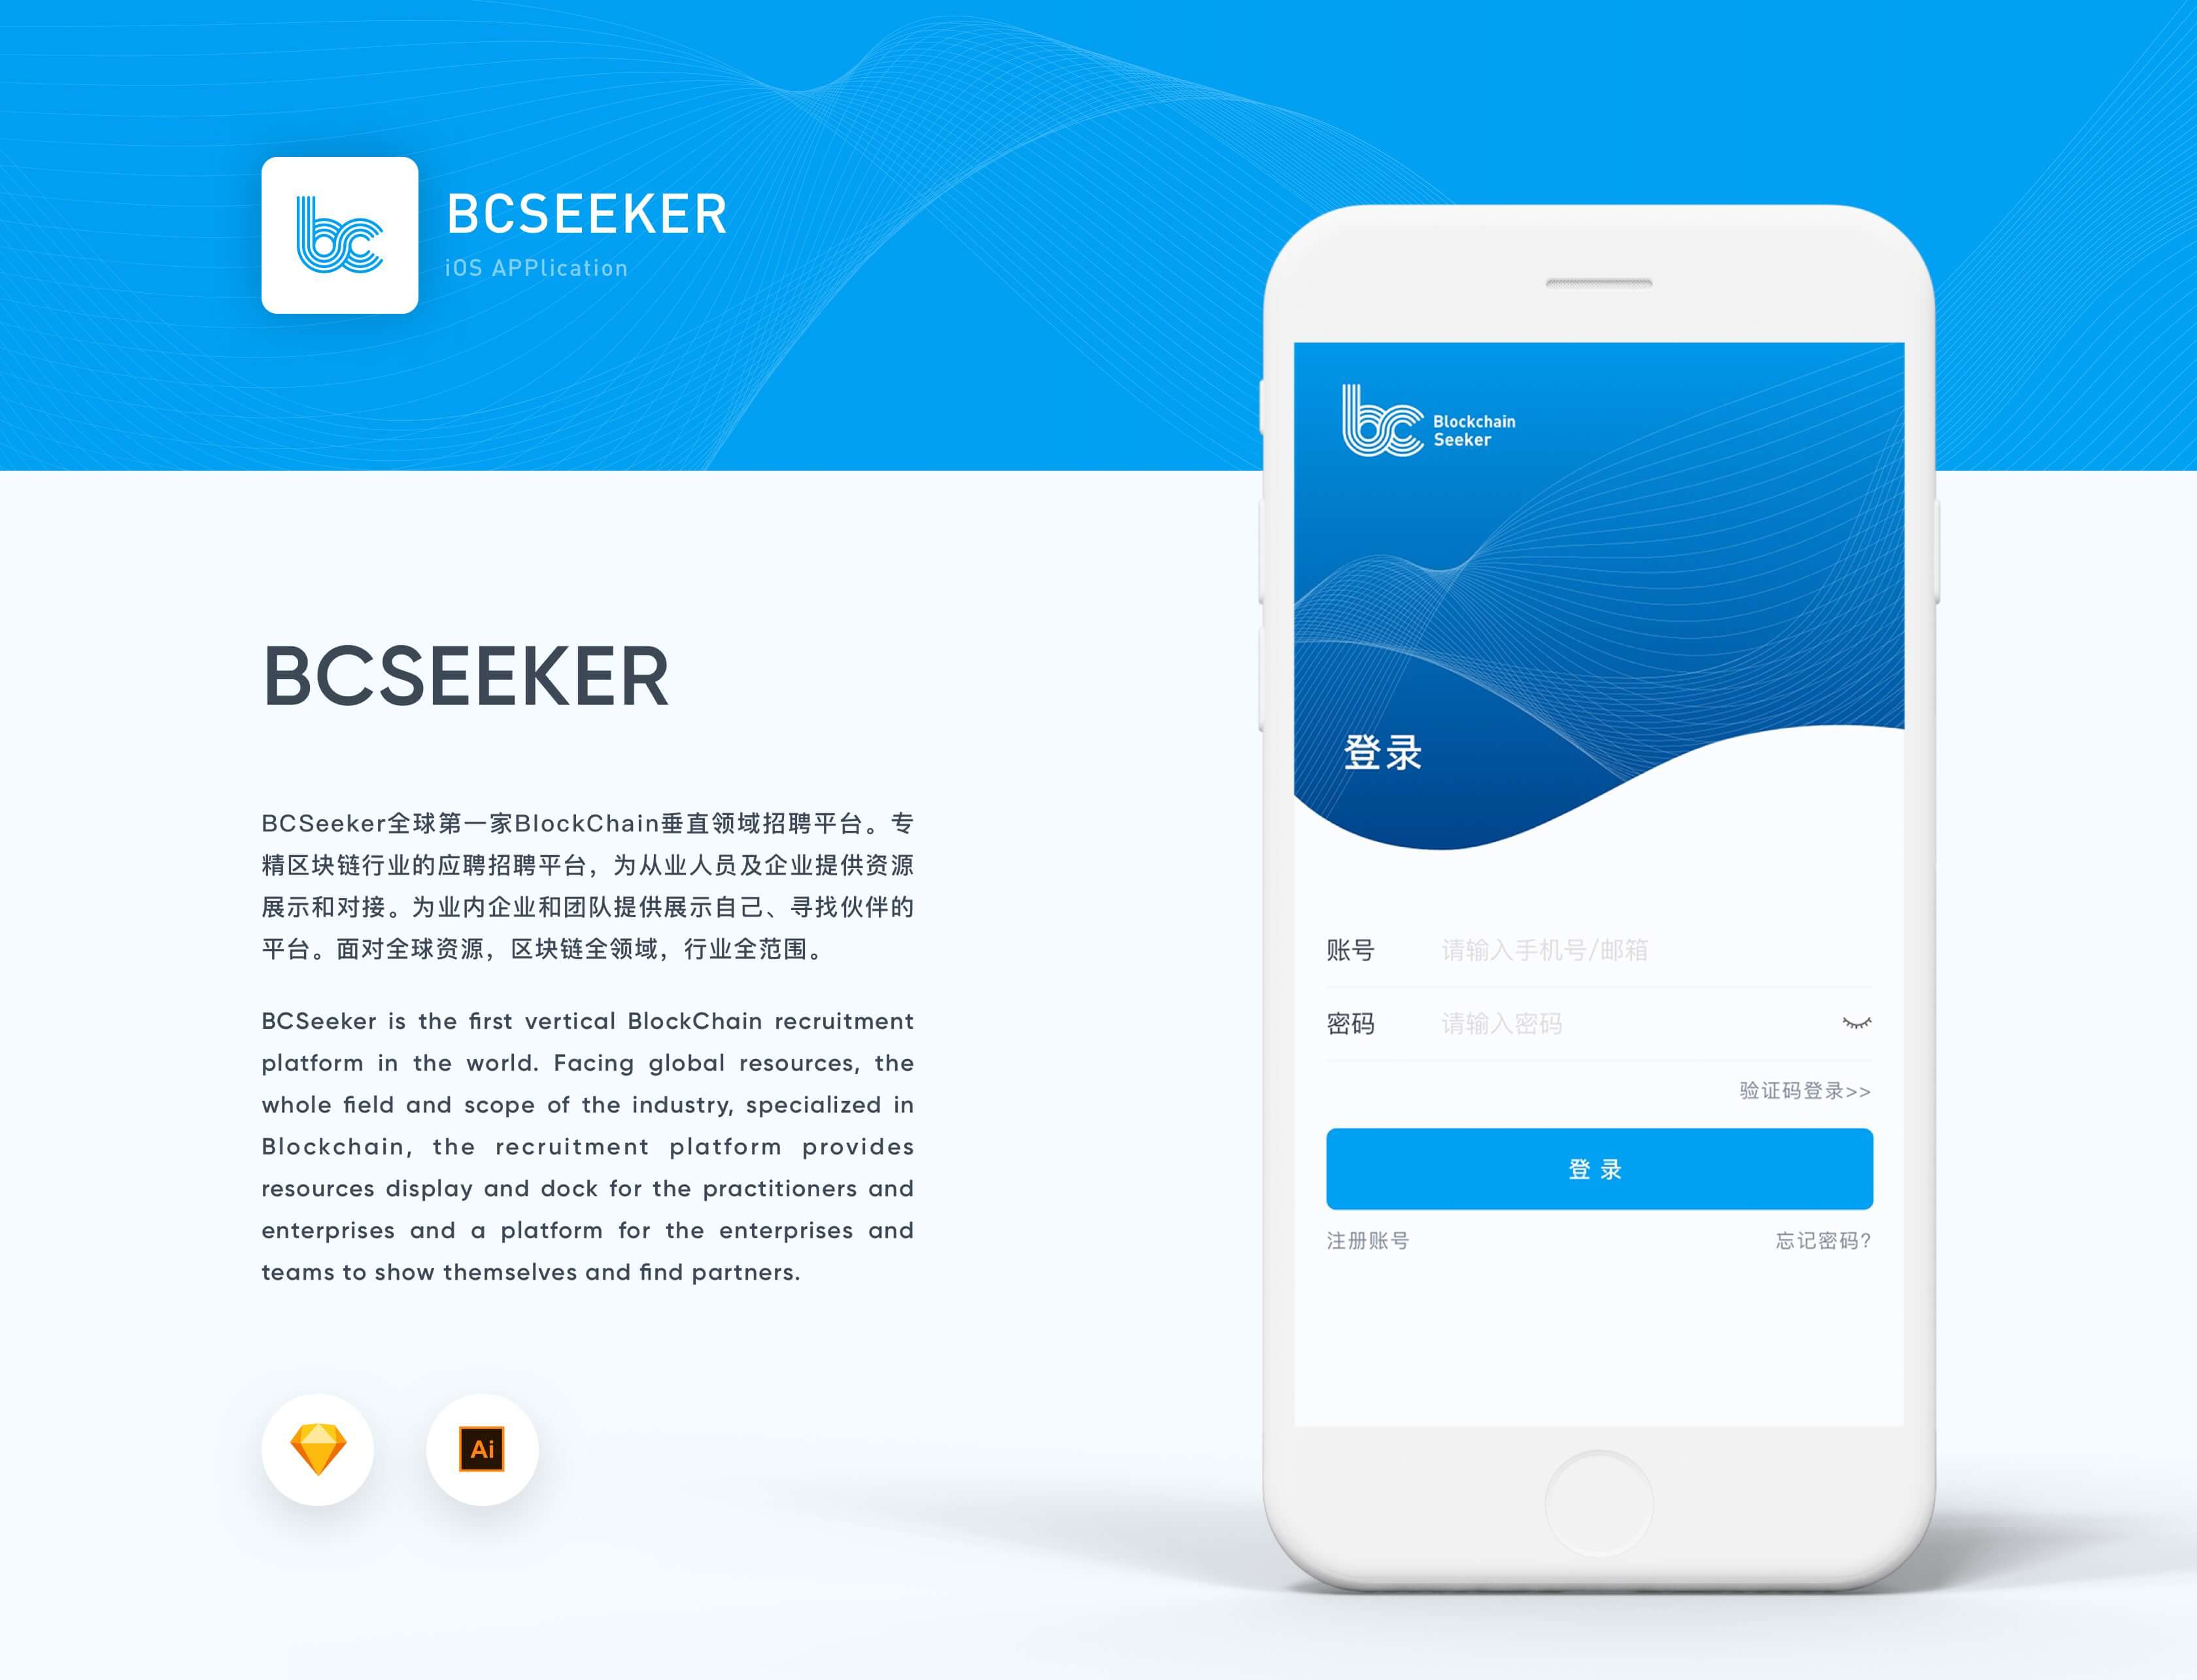 
BCseeker
BCSeeker全球第一家BlockChain垂直领域招聘平台。专精区块链行业的应聘招聘平台，为从业人员及企业提供资源展示和对接。为业内企业和团队提供展示自己、寻找伙伴的平台。面对全球资源，区块链全领域，行业全范围。
BCSeeker is the first vertical BlockChain recruitment platform in the world. Facing global resources, the whole field and scope of the industry, specialized in Blockchain, the recruitment platform provides resources display and dock for the practitioners and enterprises and a platform for the enterprises and teams to show themselves and find partners.